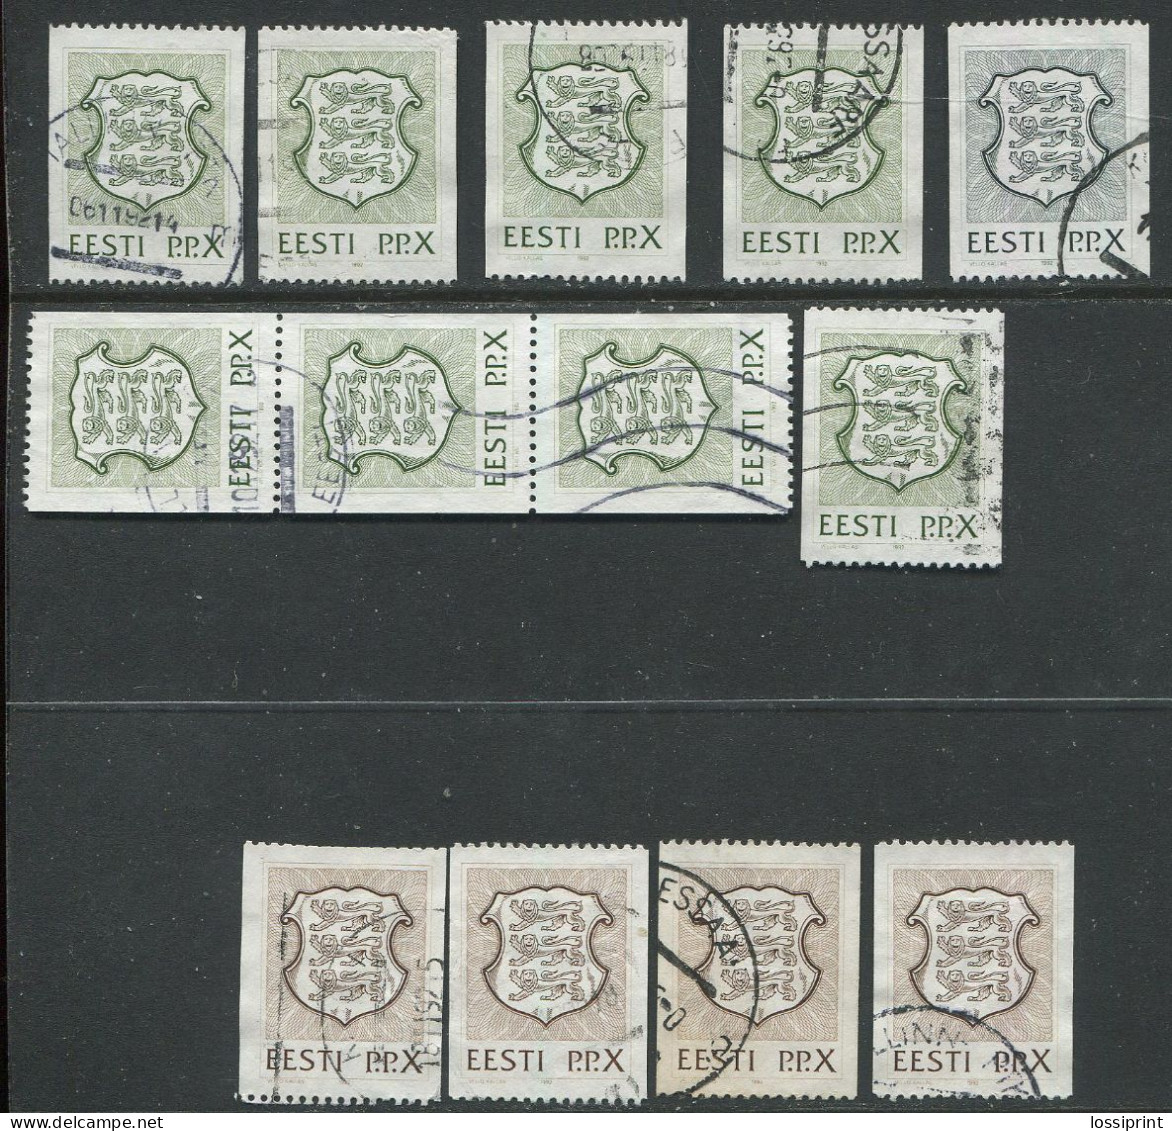 Estonia:Used Numbered Stamps P.P.X. All Issues, Numbers Seen On Second Scan, 1992 - Estonia